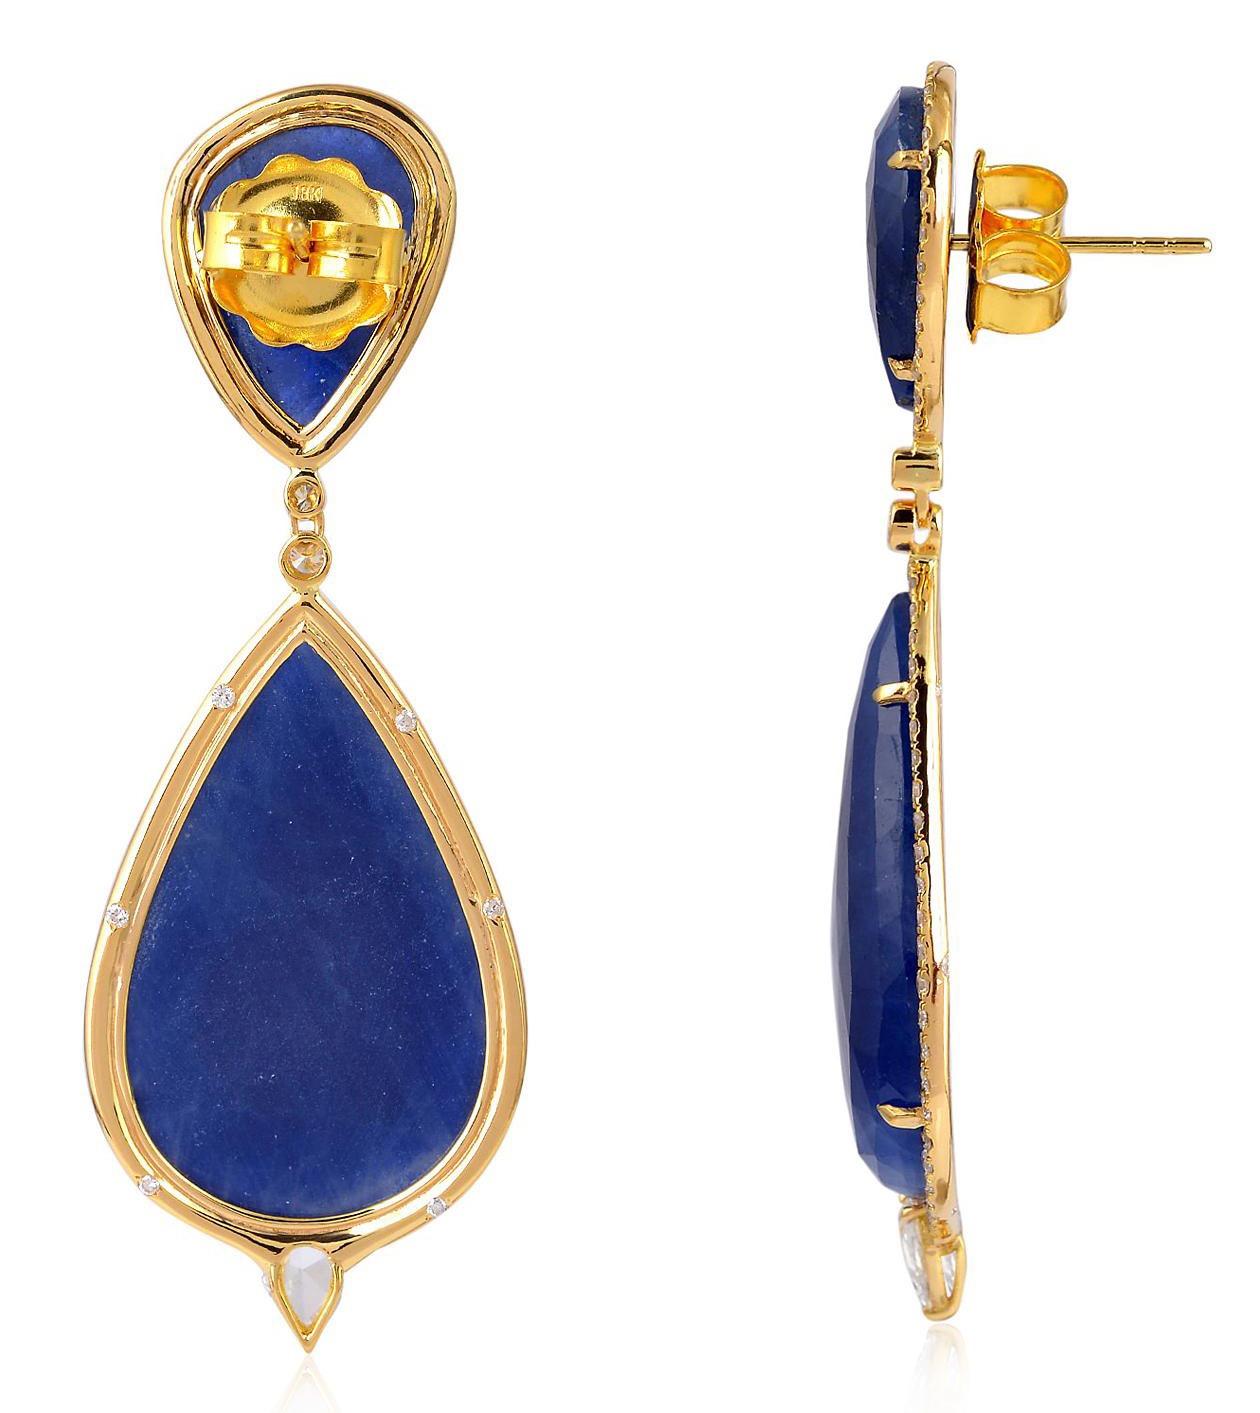 Handcrafted from 18-karat gold, these exquisite drop earrings are set with 55.76 carats blue sapphire and 2.05 carats of glimmering diamonds. 

FOLLOW  MEGHNA JEWELS storefront to view the latest collection & exclusive pieces.  Meghna Jewels is